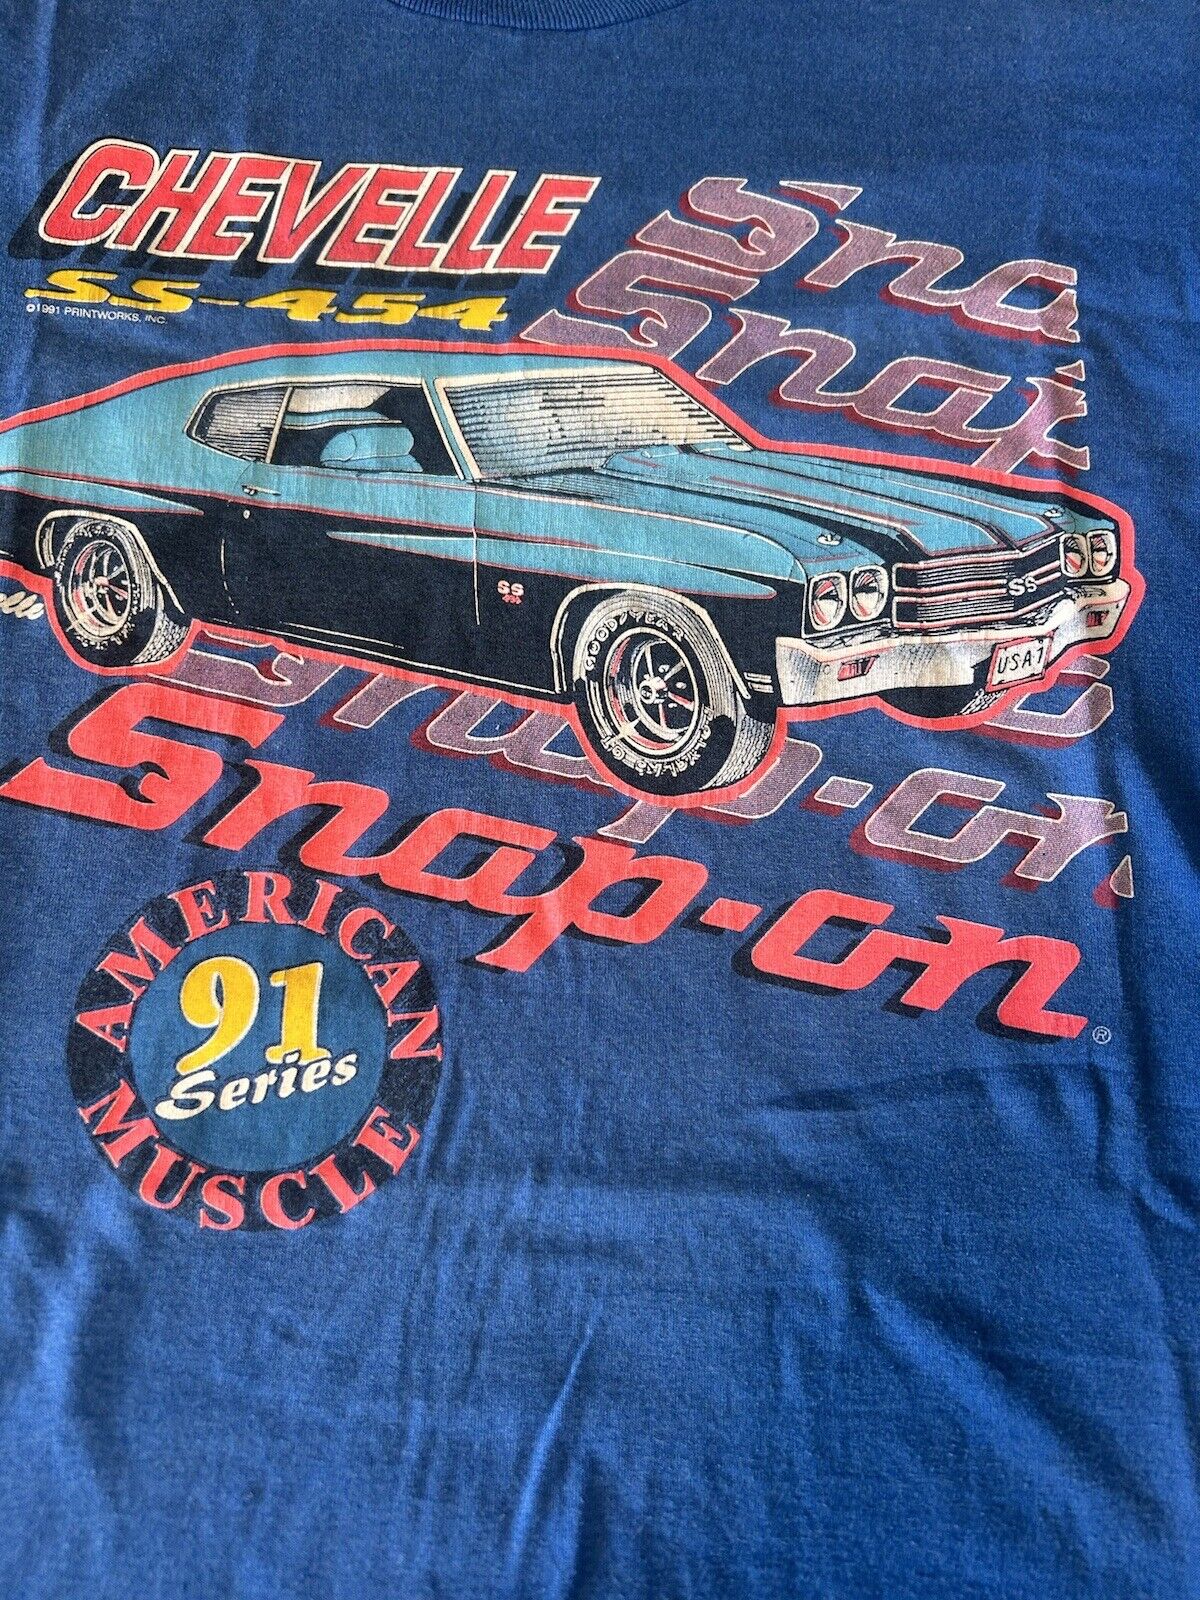 Vintage Chevelle Snap On Shirt 1991 Series Americ… - image 2